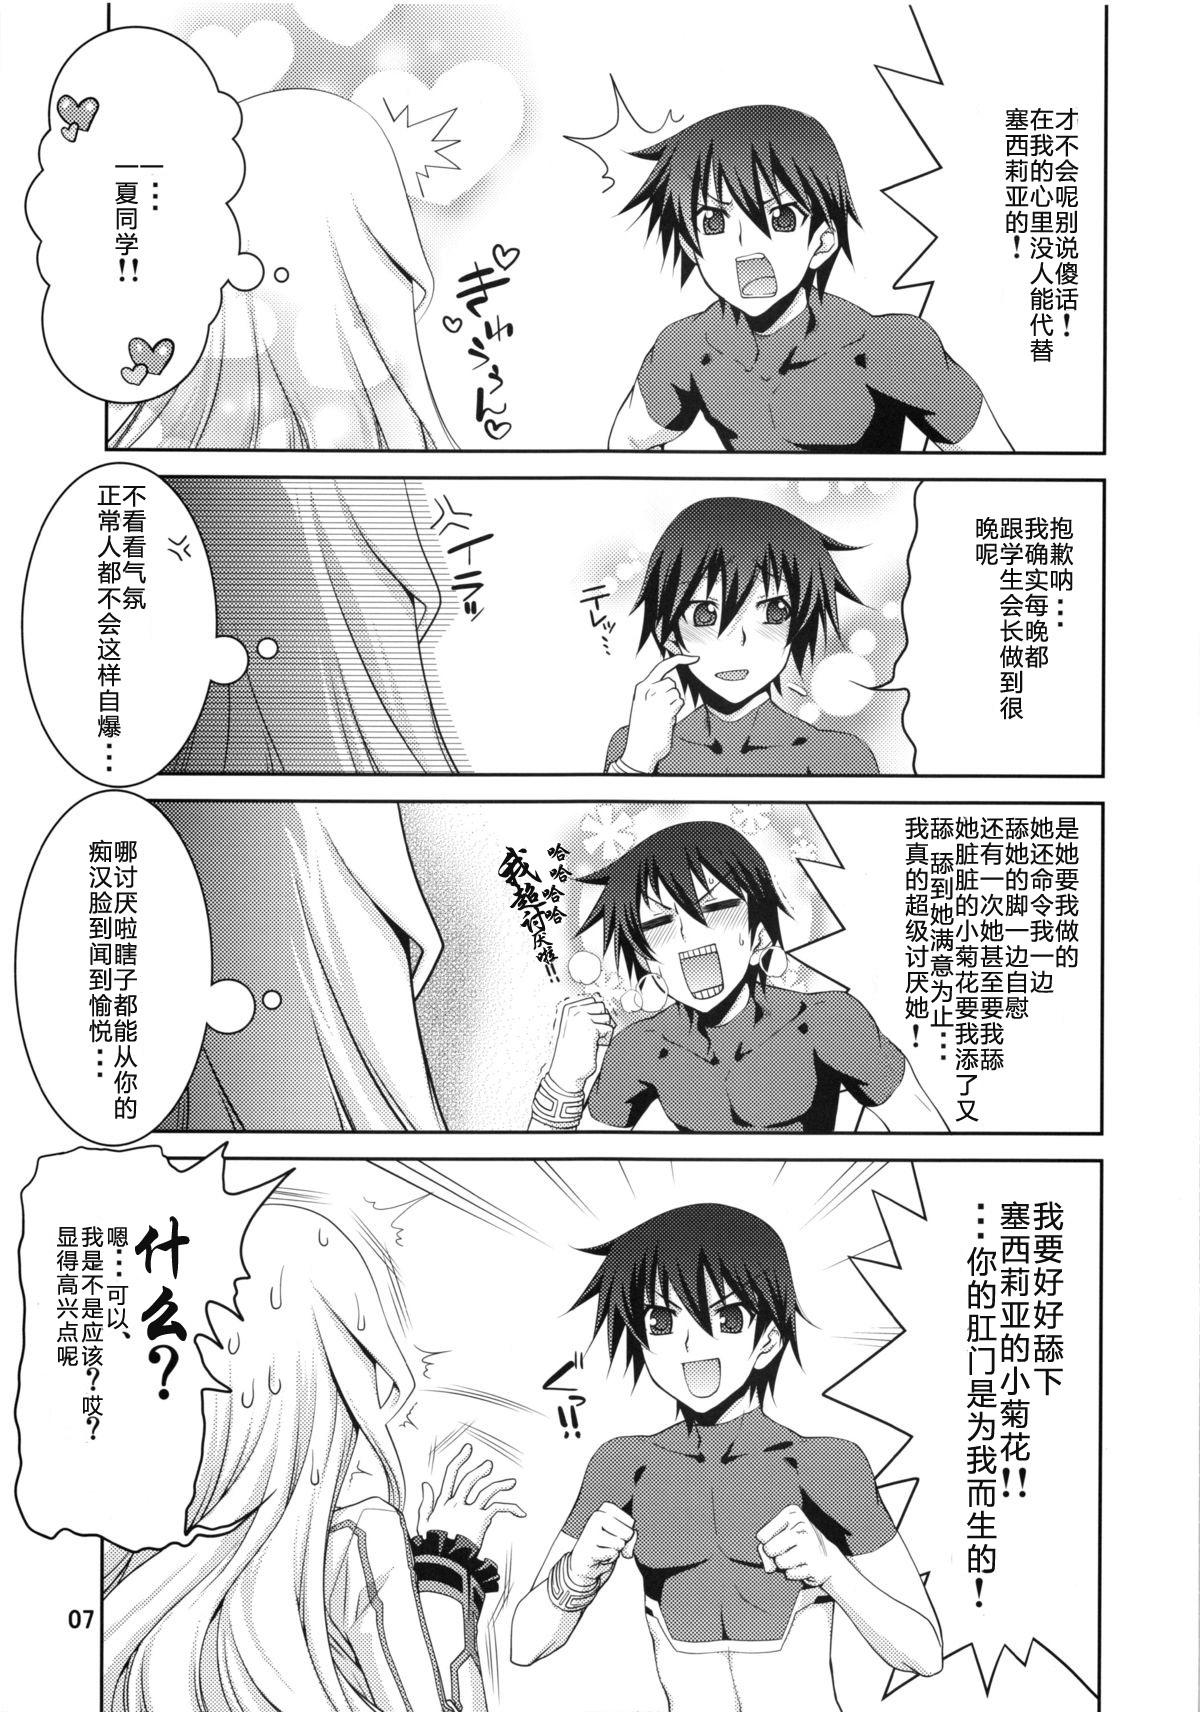 New IS 2 - Infinite stratos Culito - Page 6